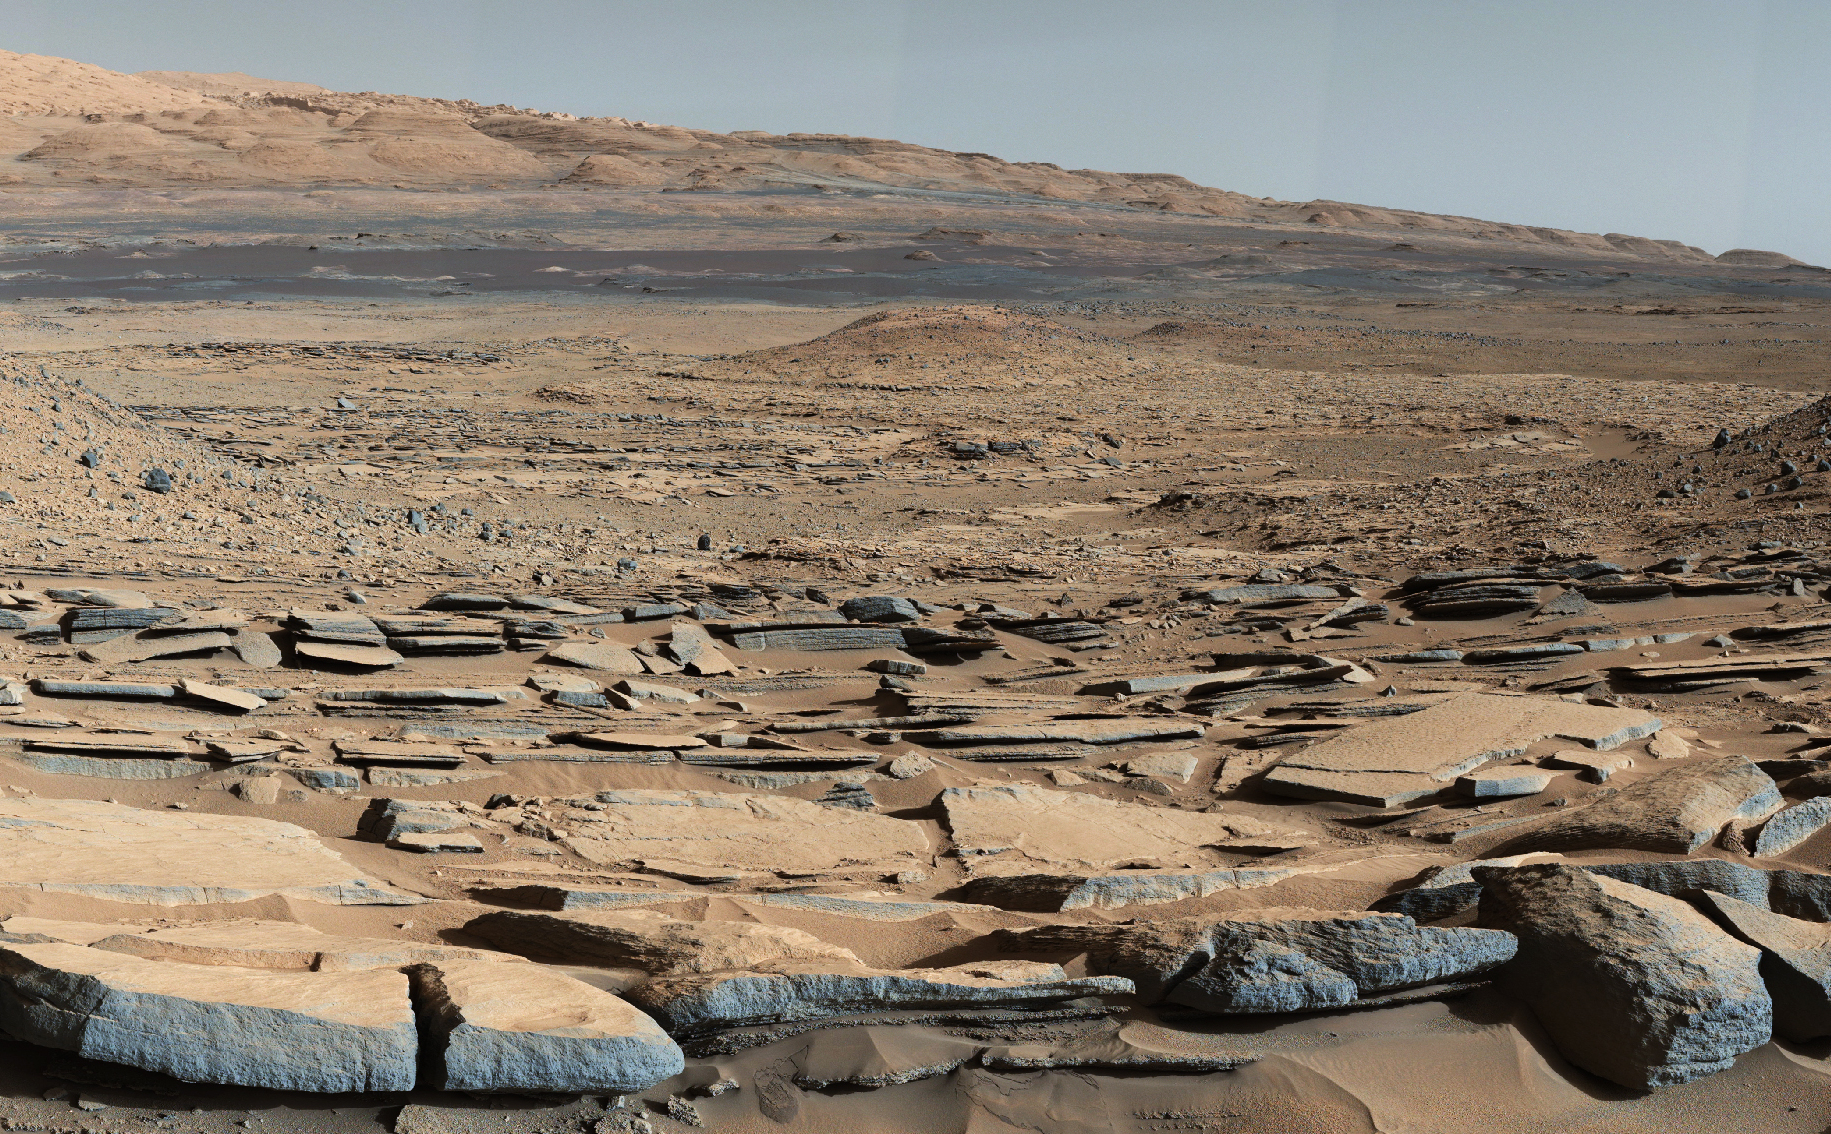 A view from the "Kimberley" formation on Mars taken by NASA's Curiosity rover. The strata in the foreground dip towards the base of Mount Sharp, indicating the ancient depression that existed before the larger bulk of the mountain formed.